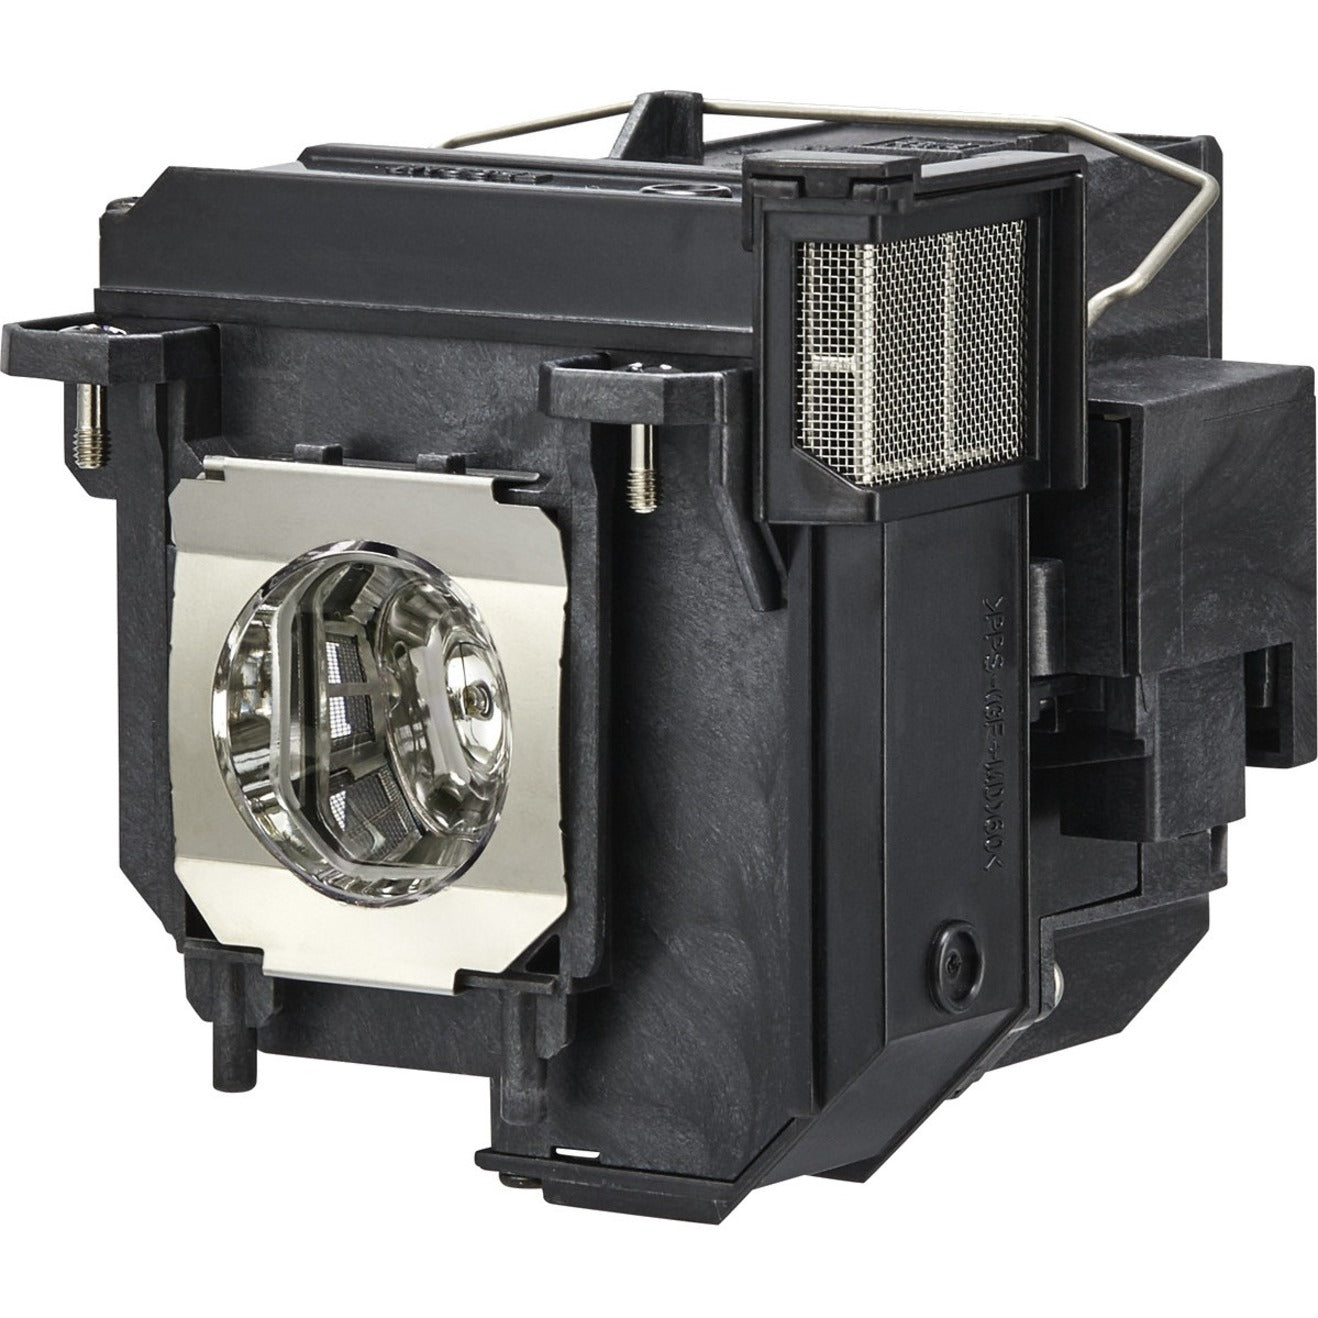 Epson V13H010L90 Lamp - ELPLP90 - EB-67x/68x (215W), Compatible with Epson Projectors